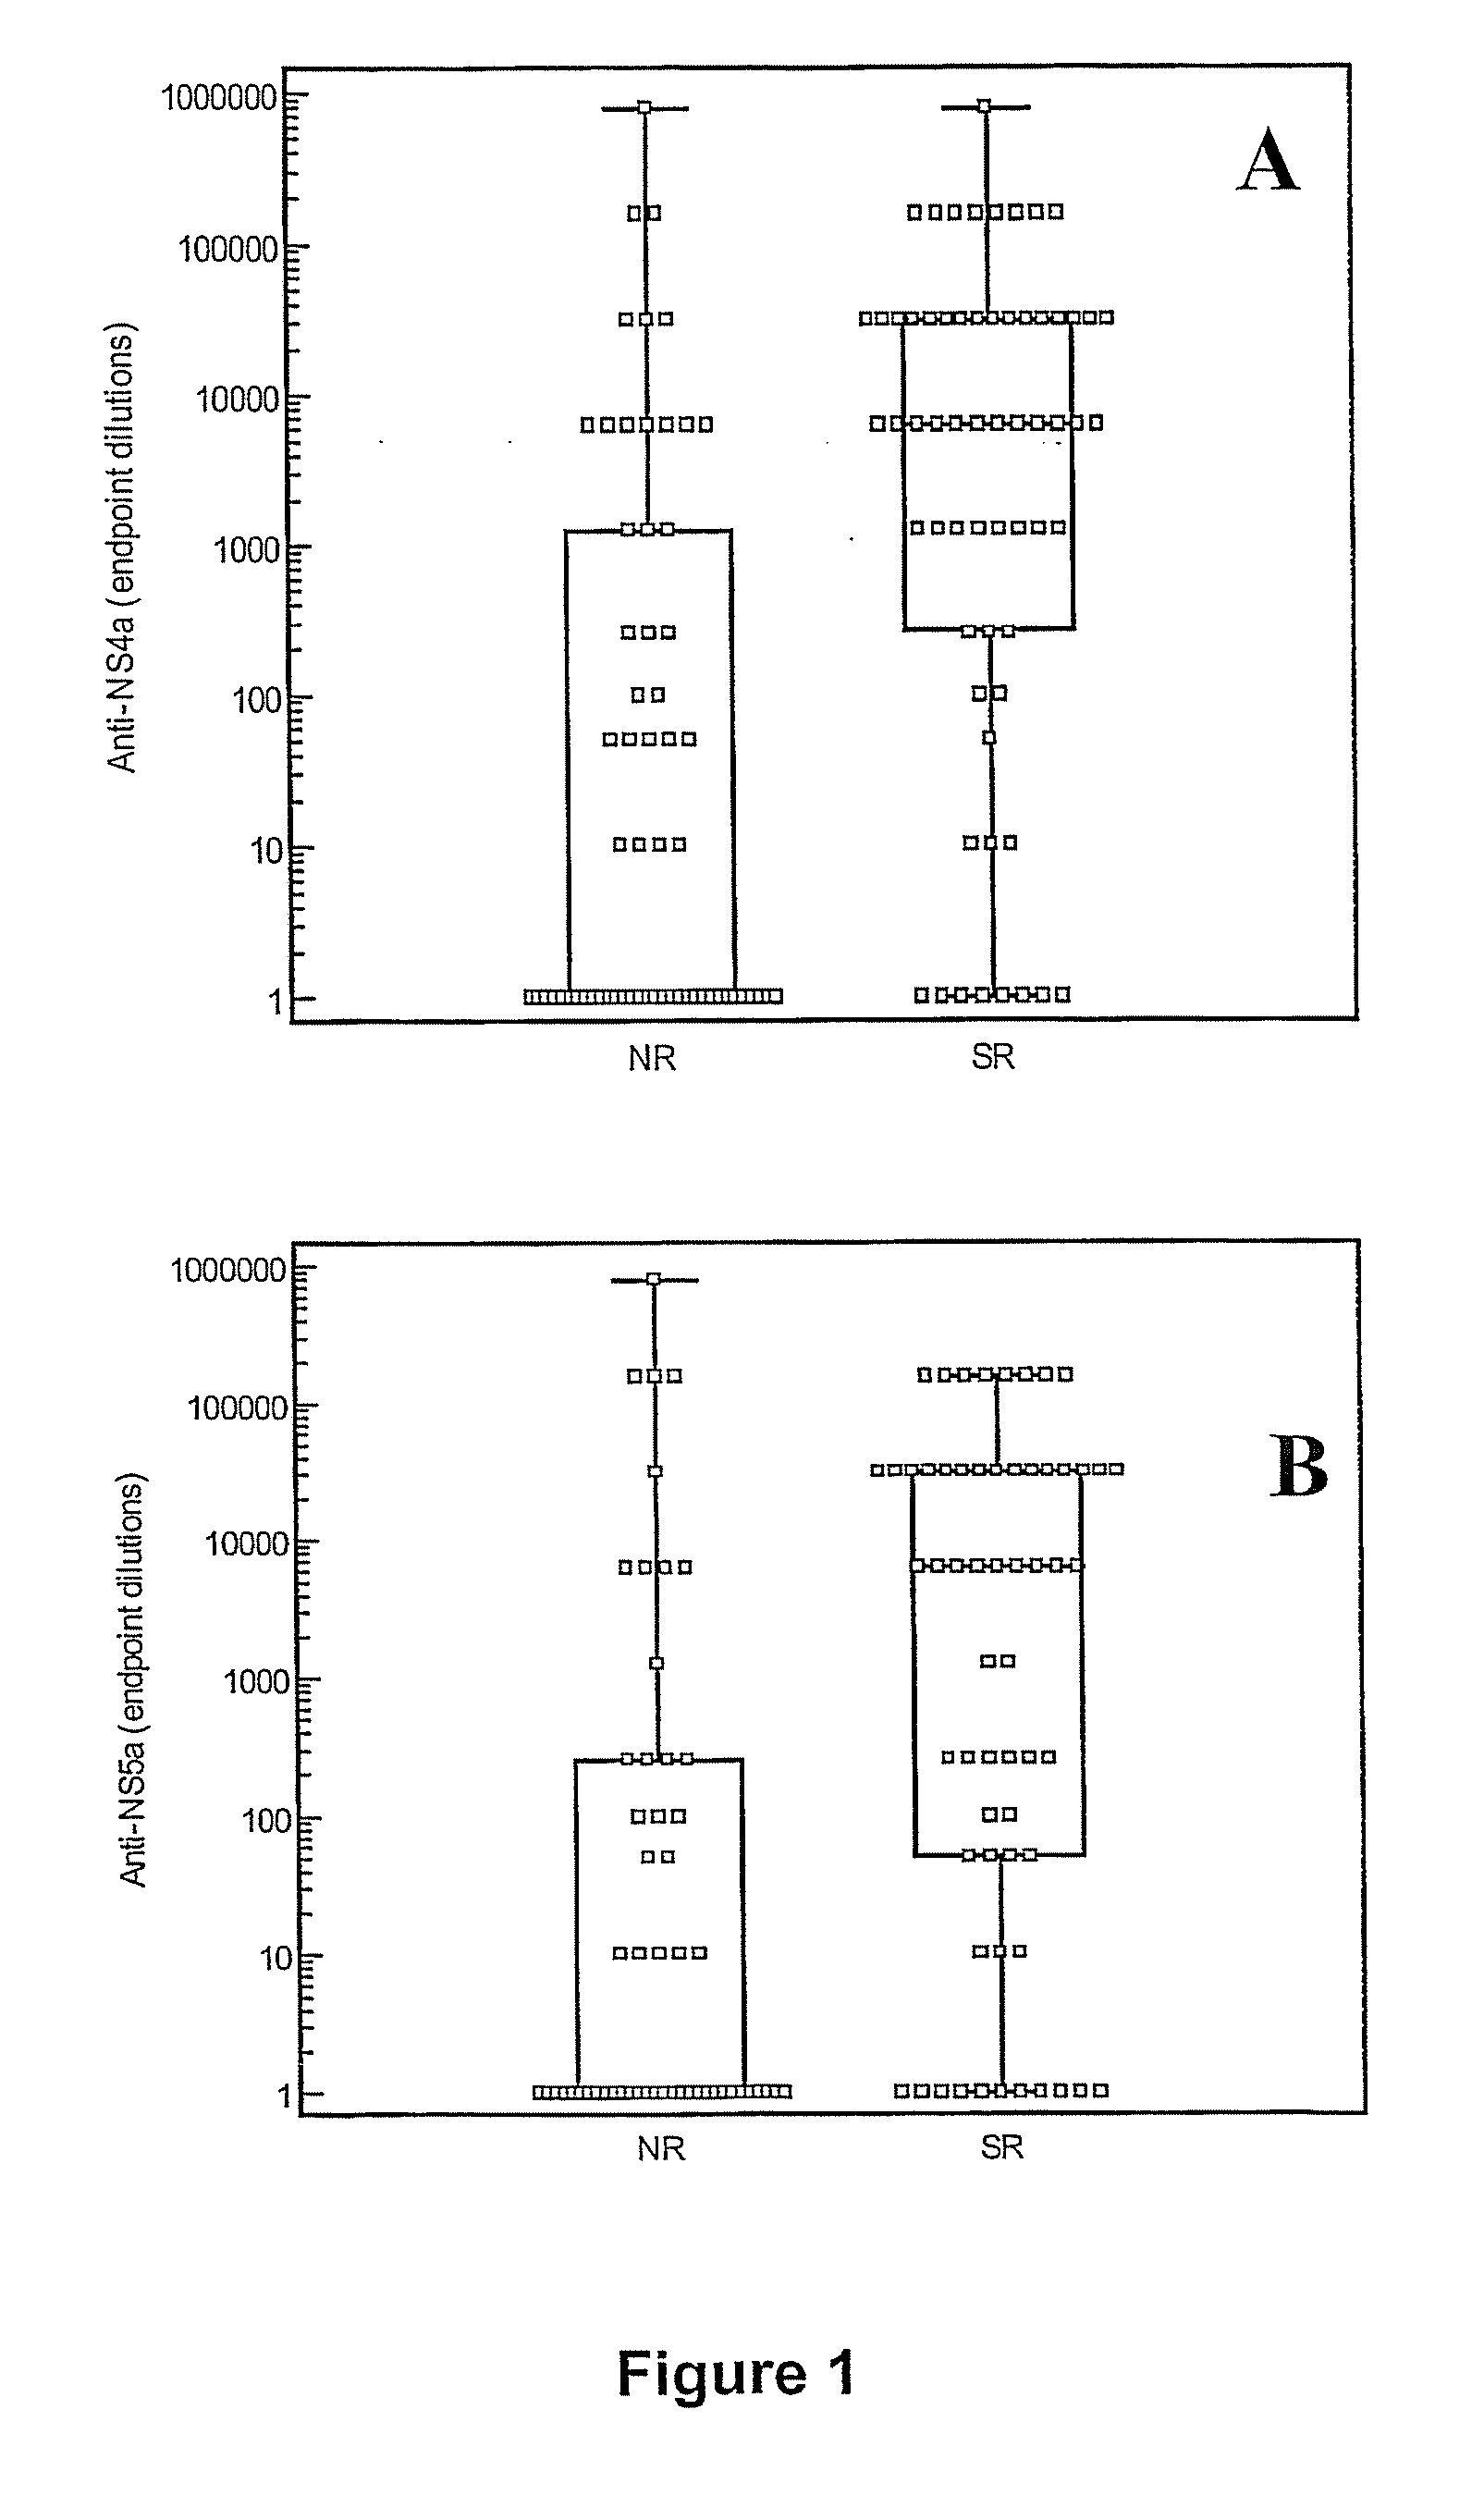 Methods for predicting the efficacy or outcome of hcv therapy